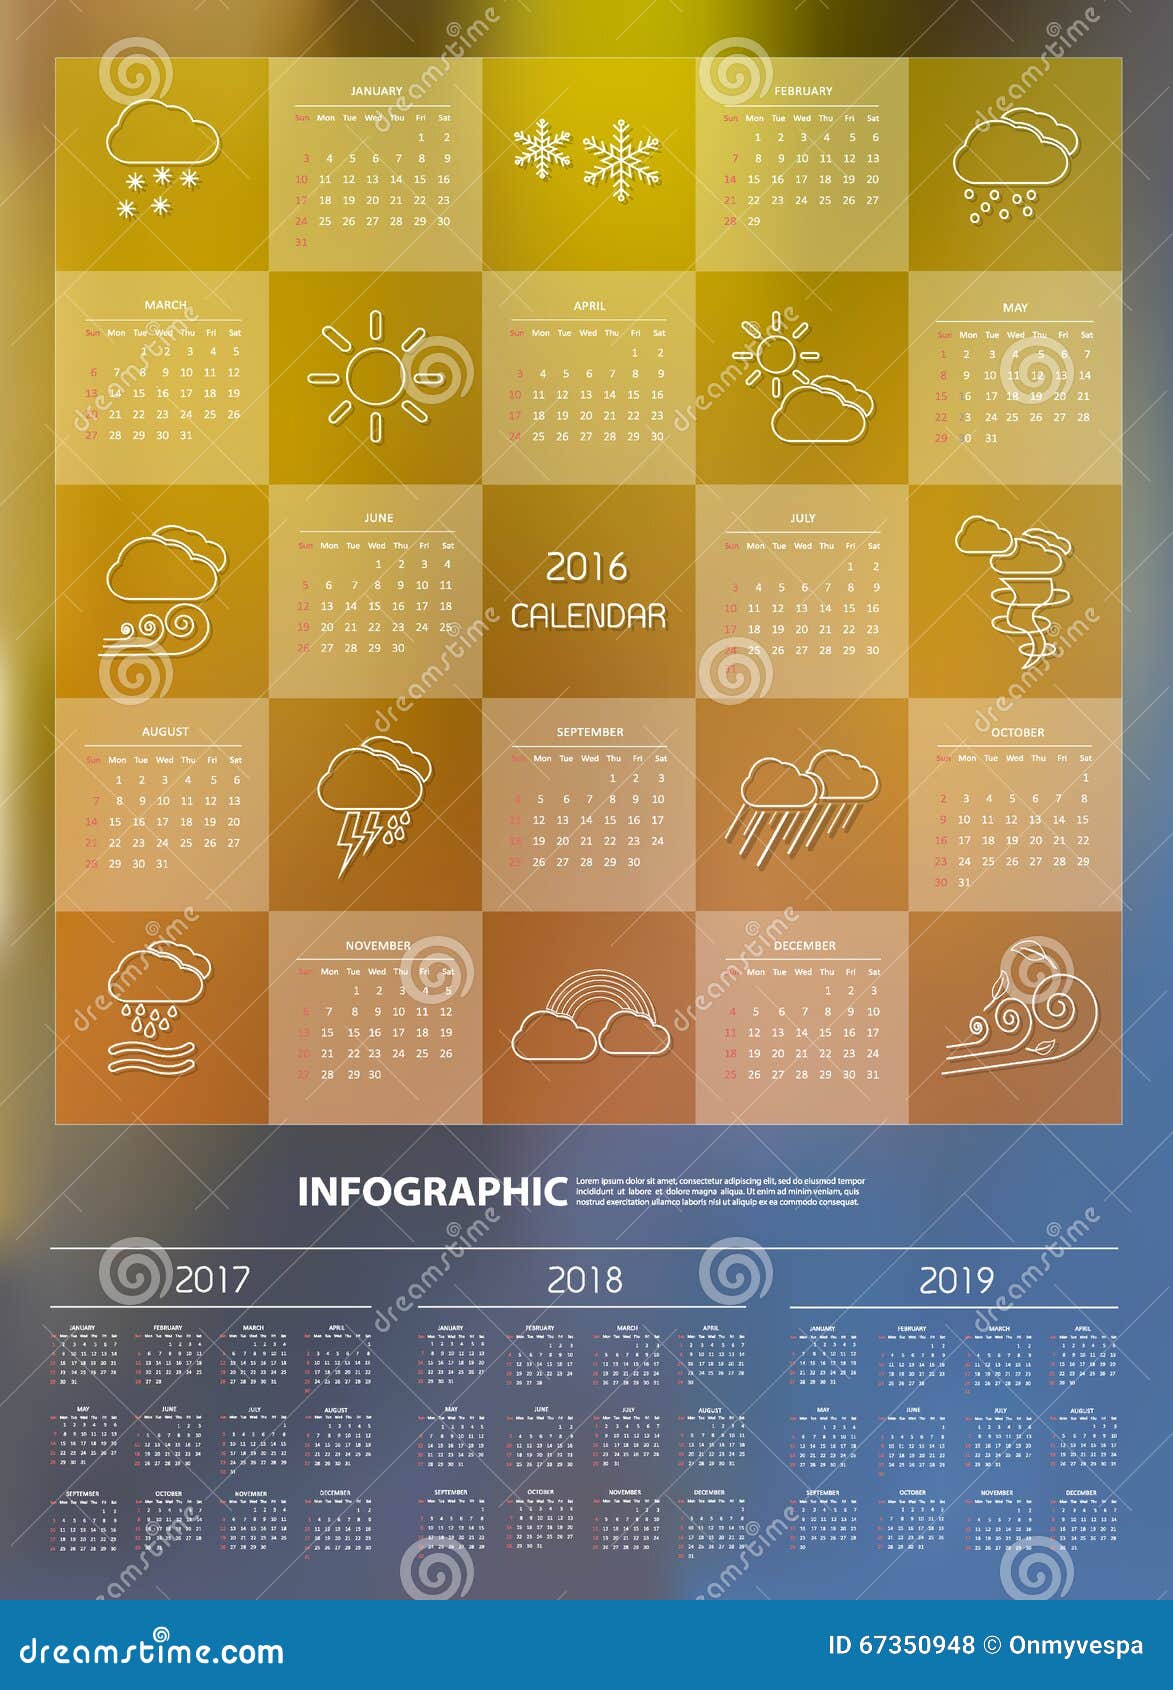 2016 Calendar Design Template with Weather Icon Set Stock Illustration